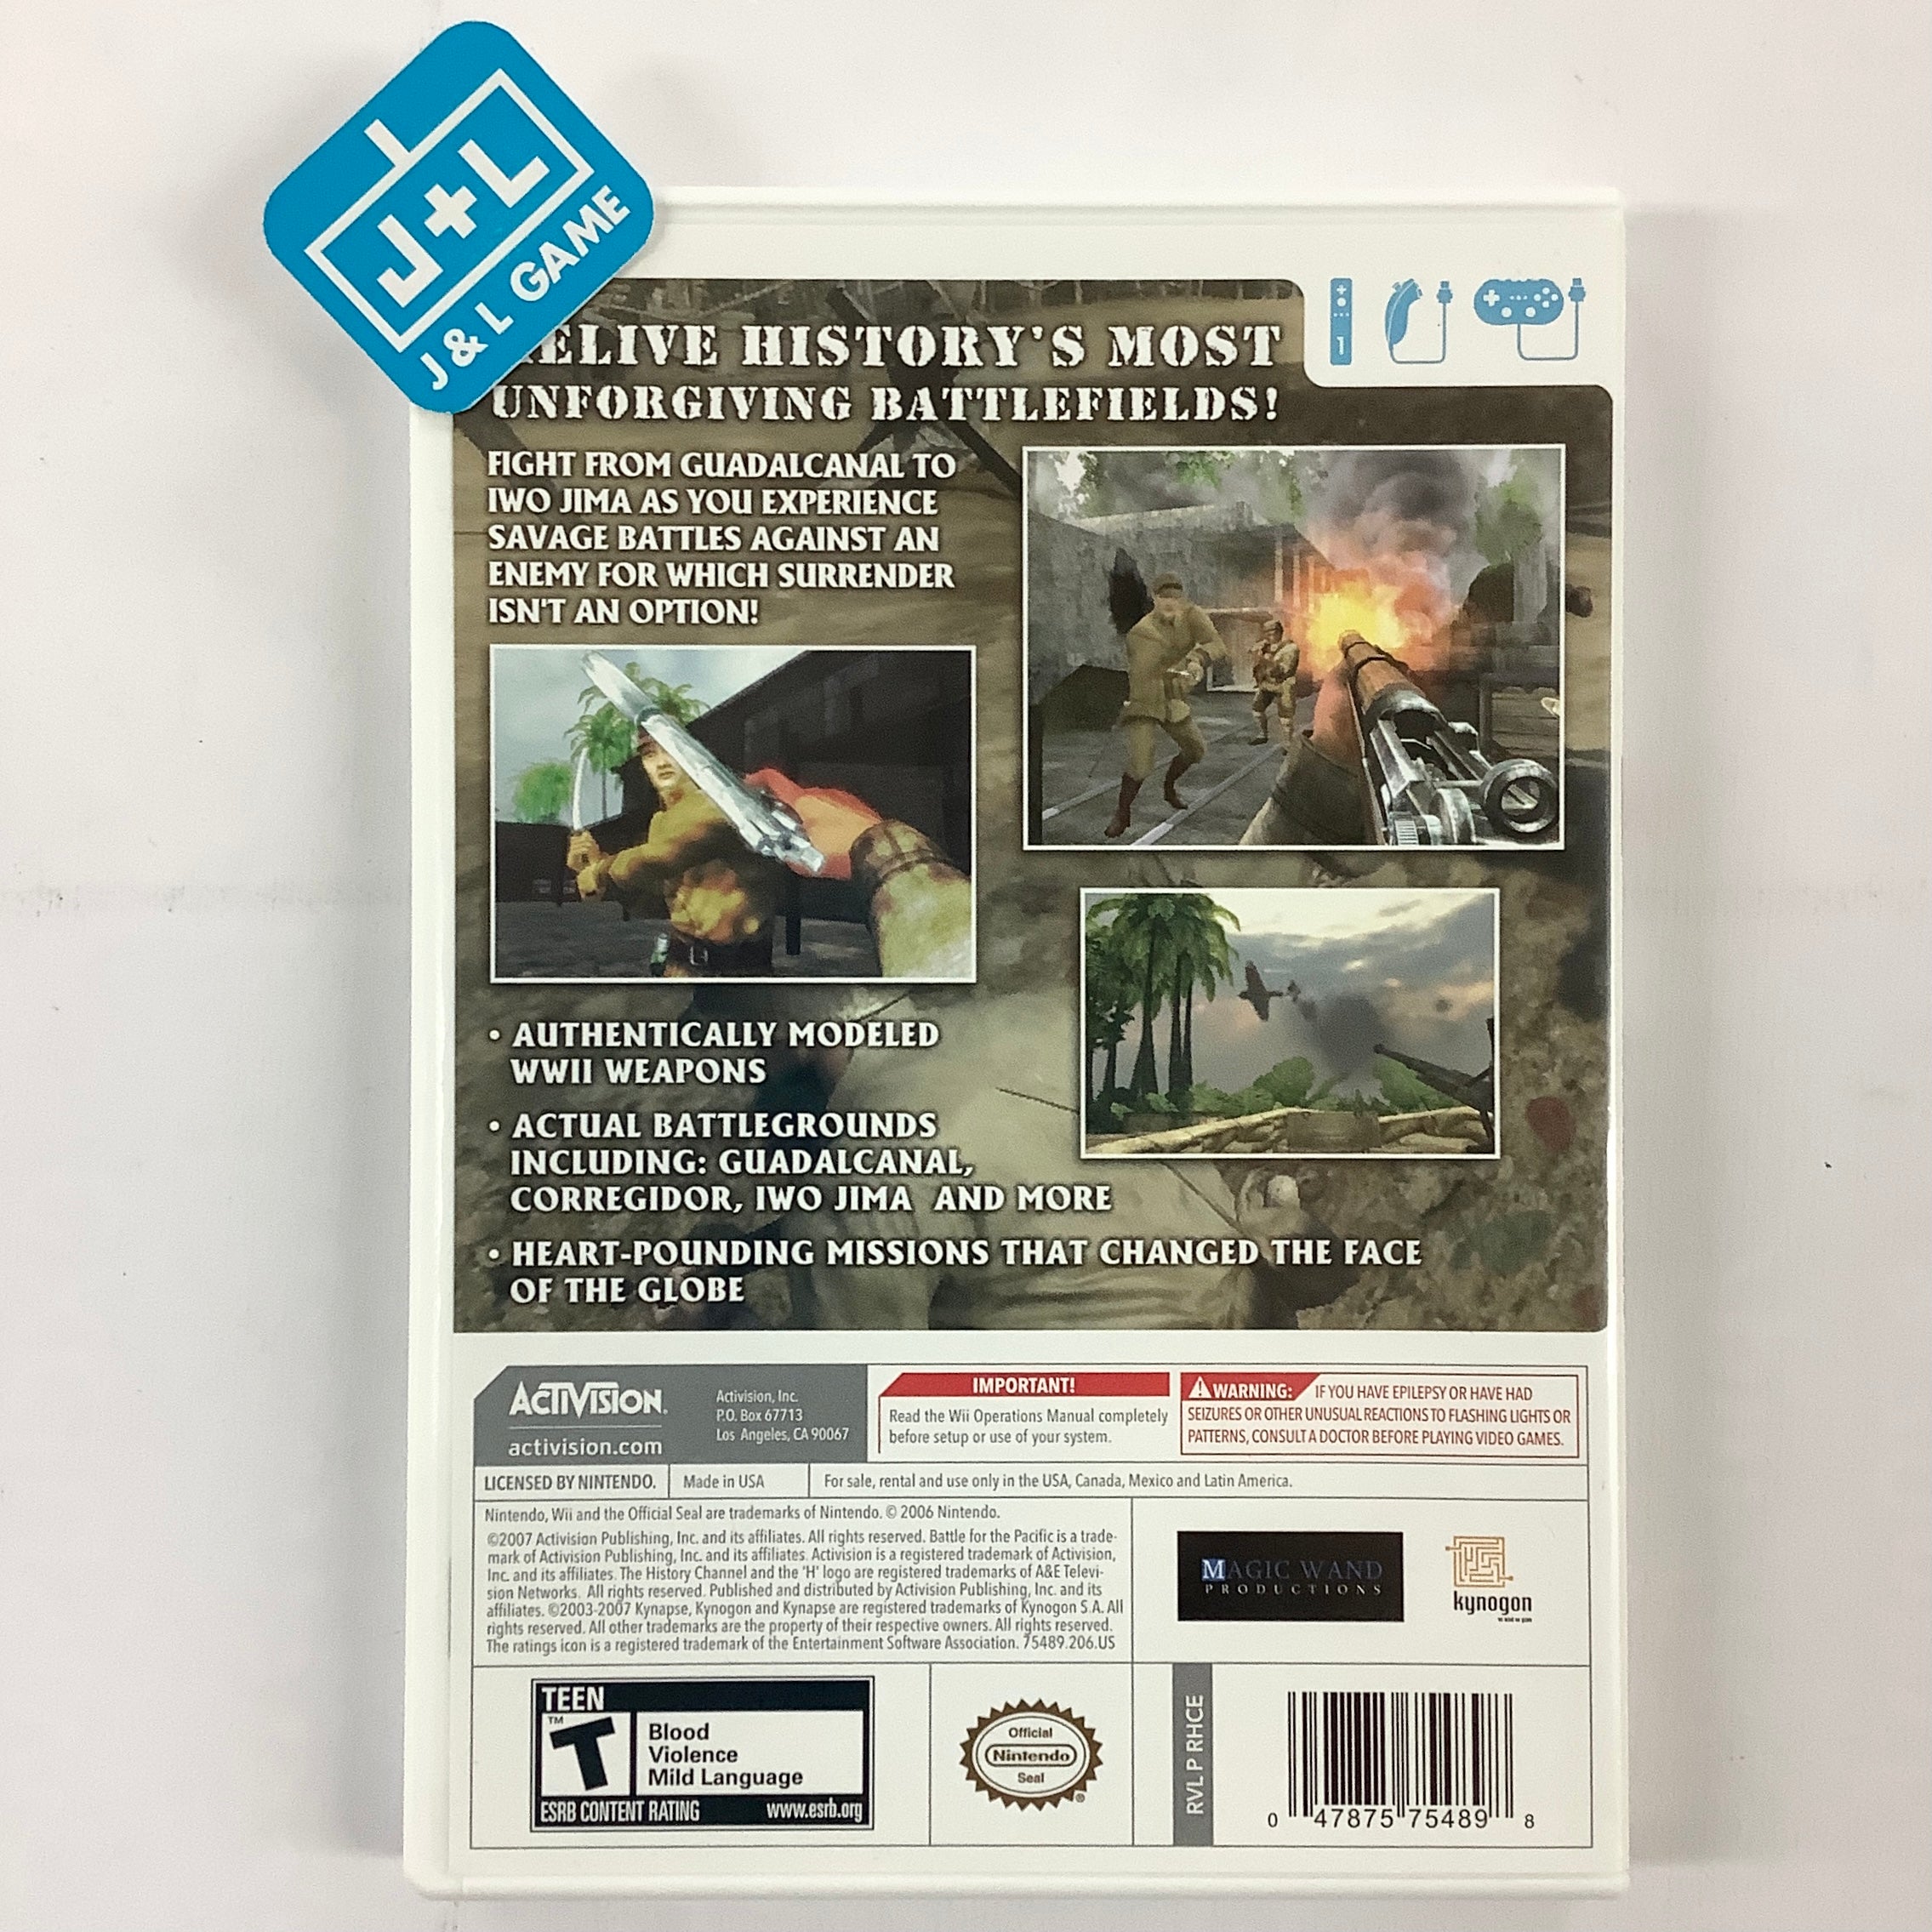 The History Channel: Battle For the Pacific - Nintendo Wii [Pre-Owned] Video Games ACTIVISION   